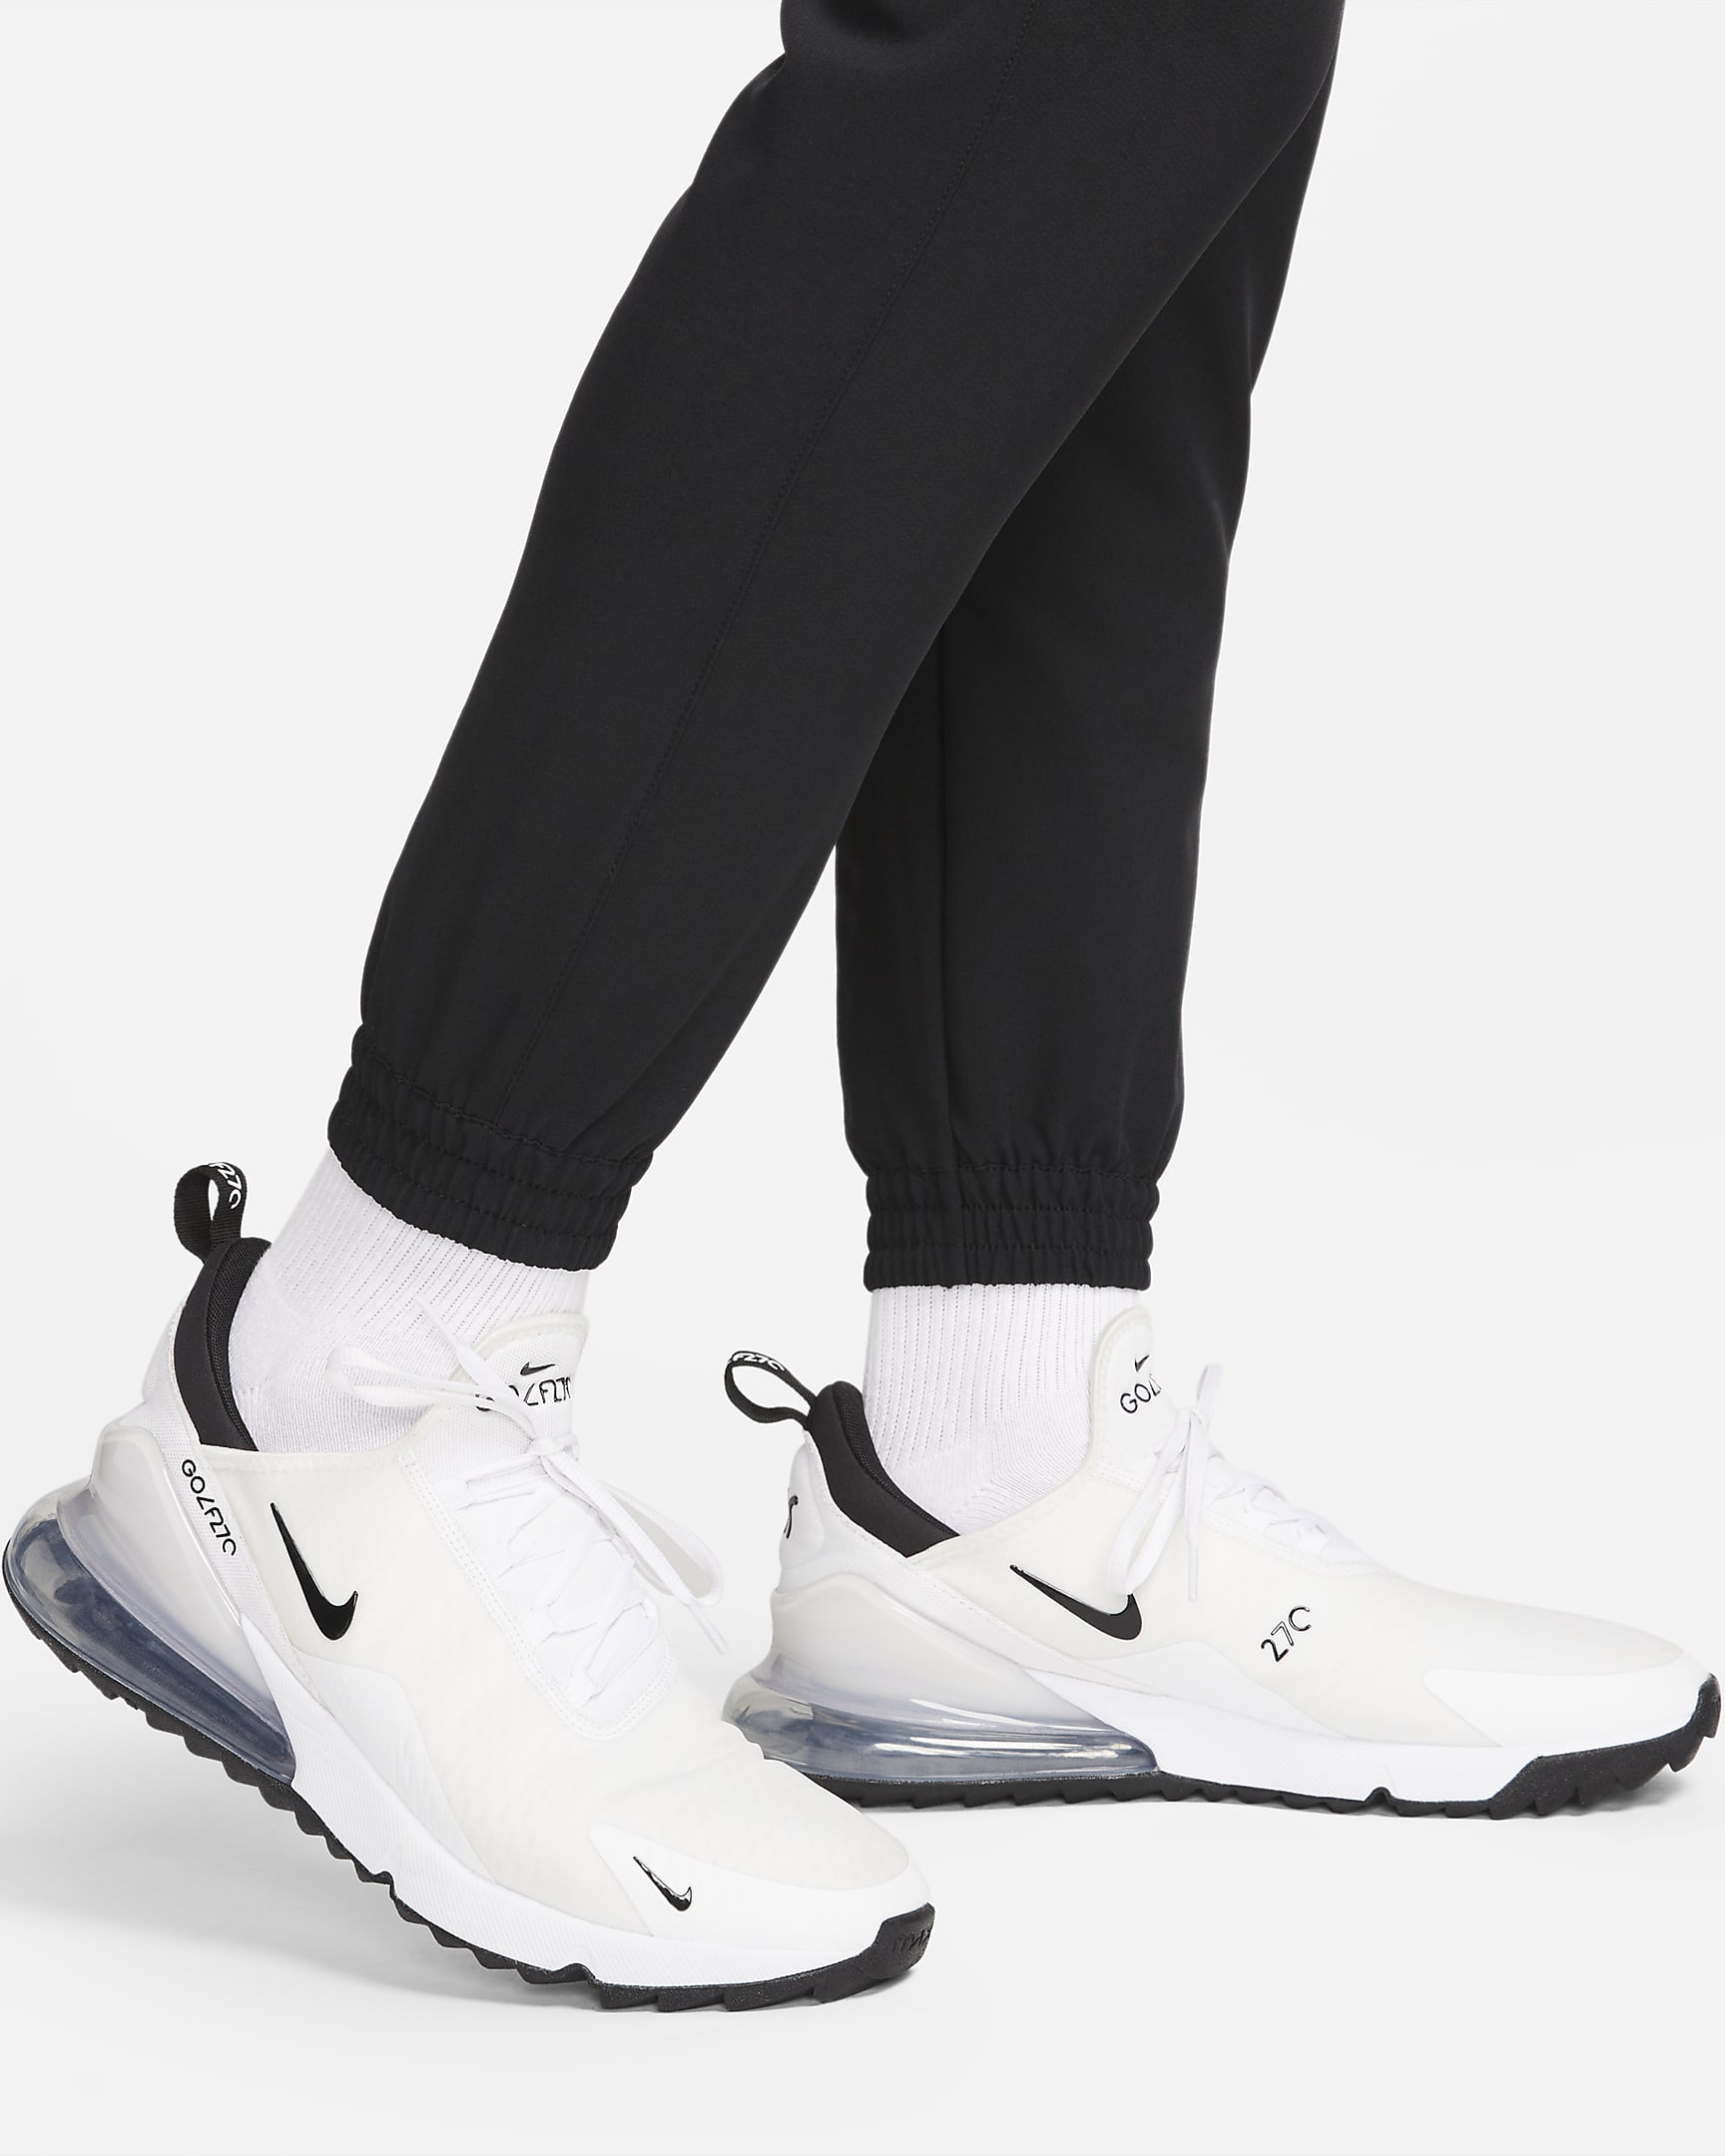 Nike Unscripted Men's Golf Jogger. Nike ID